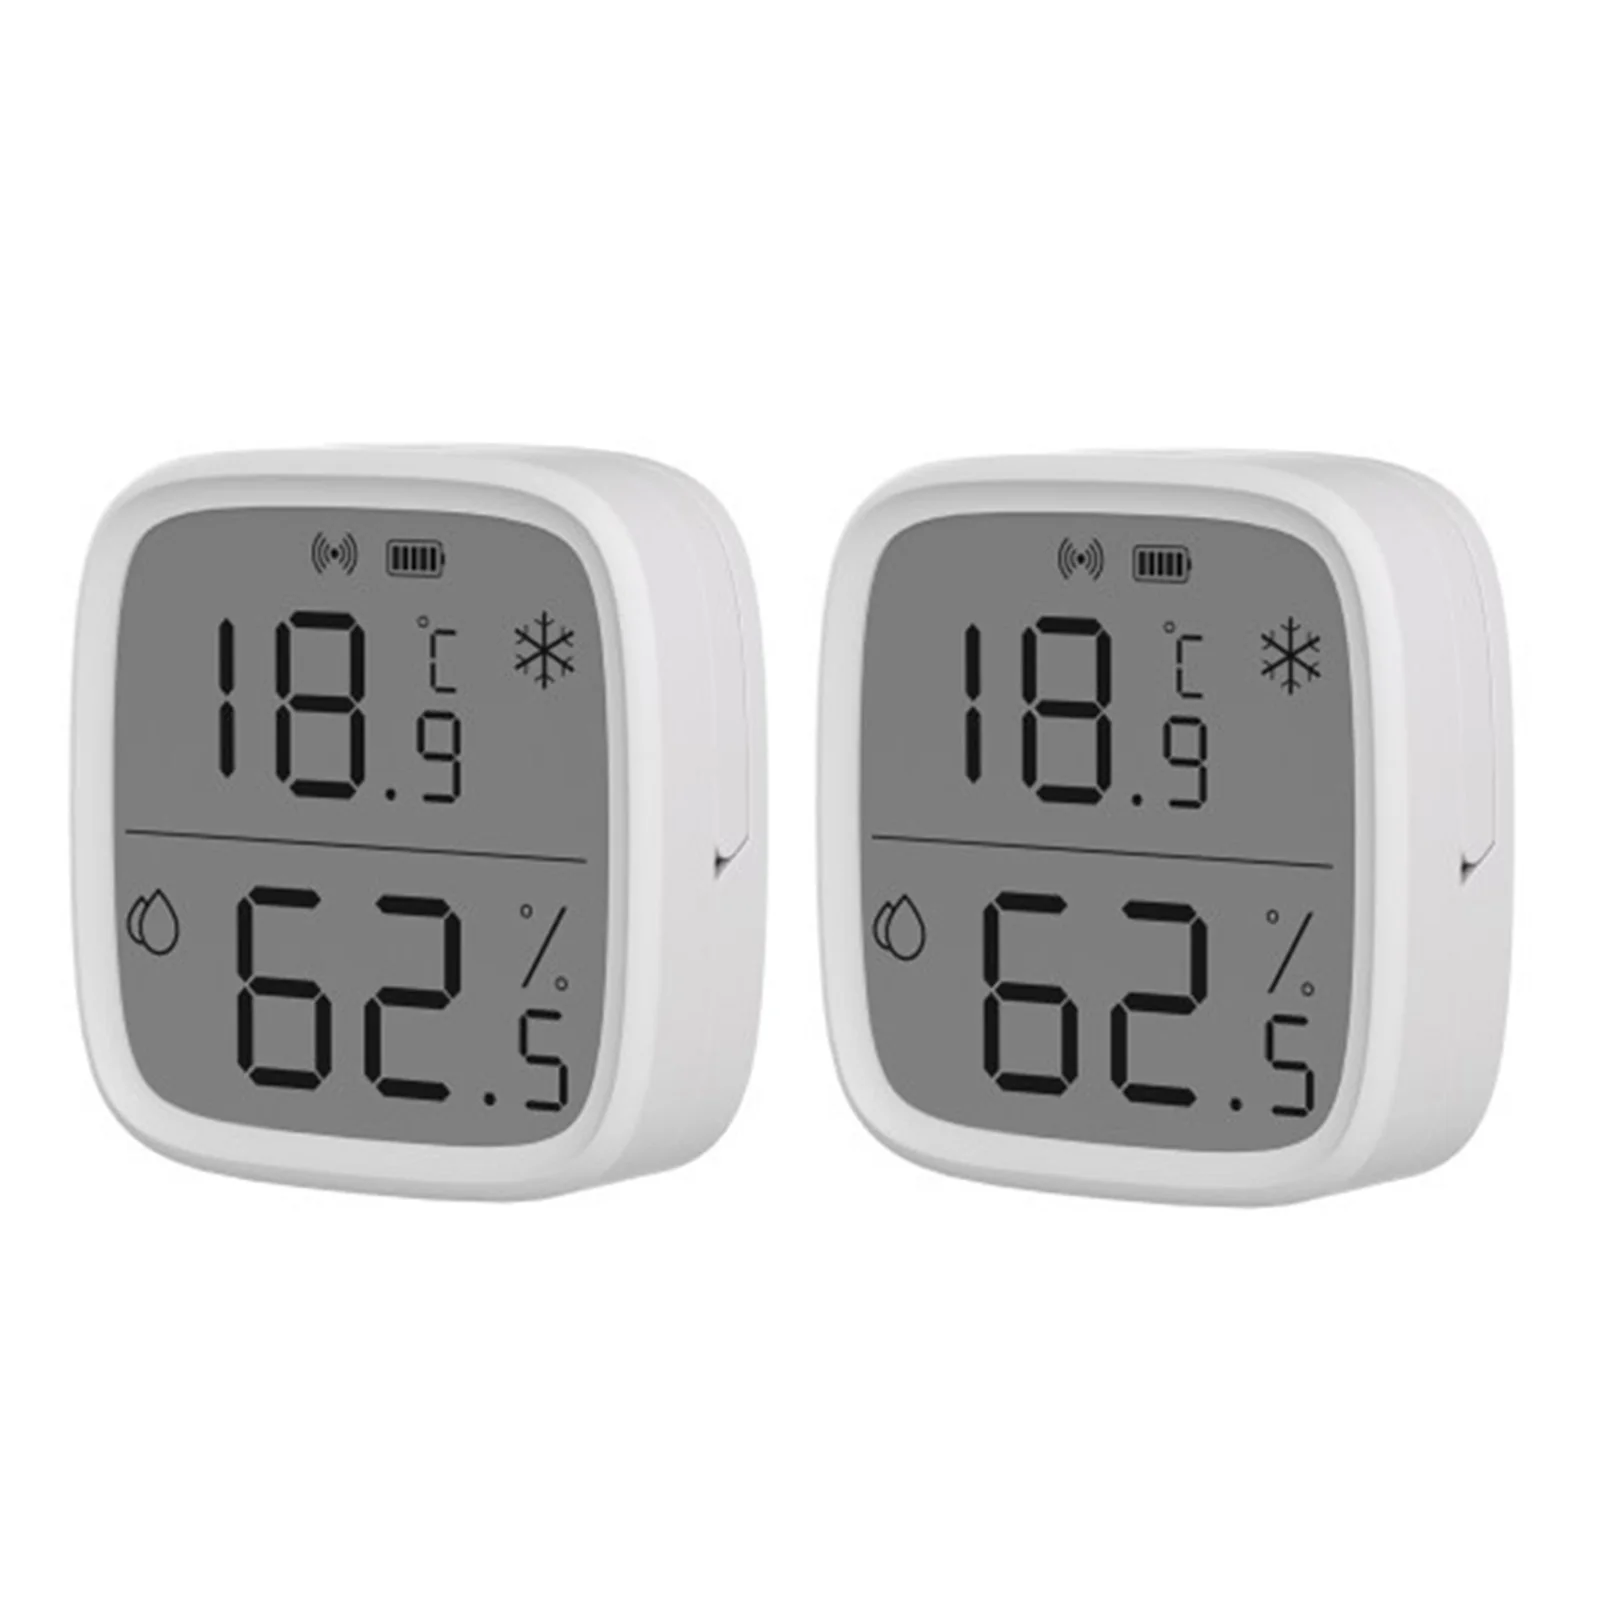 

2Pcs SNZB-02D Temperature And Humidity Display Compatible With Zigbee3.0 Home Electris Supplies Accessories 62.5*59.5mm -9.9~60